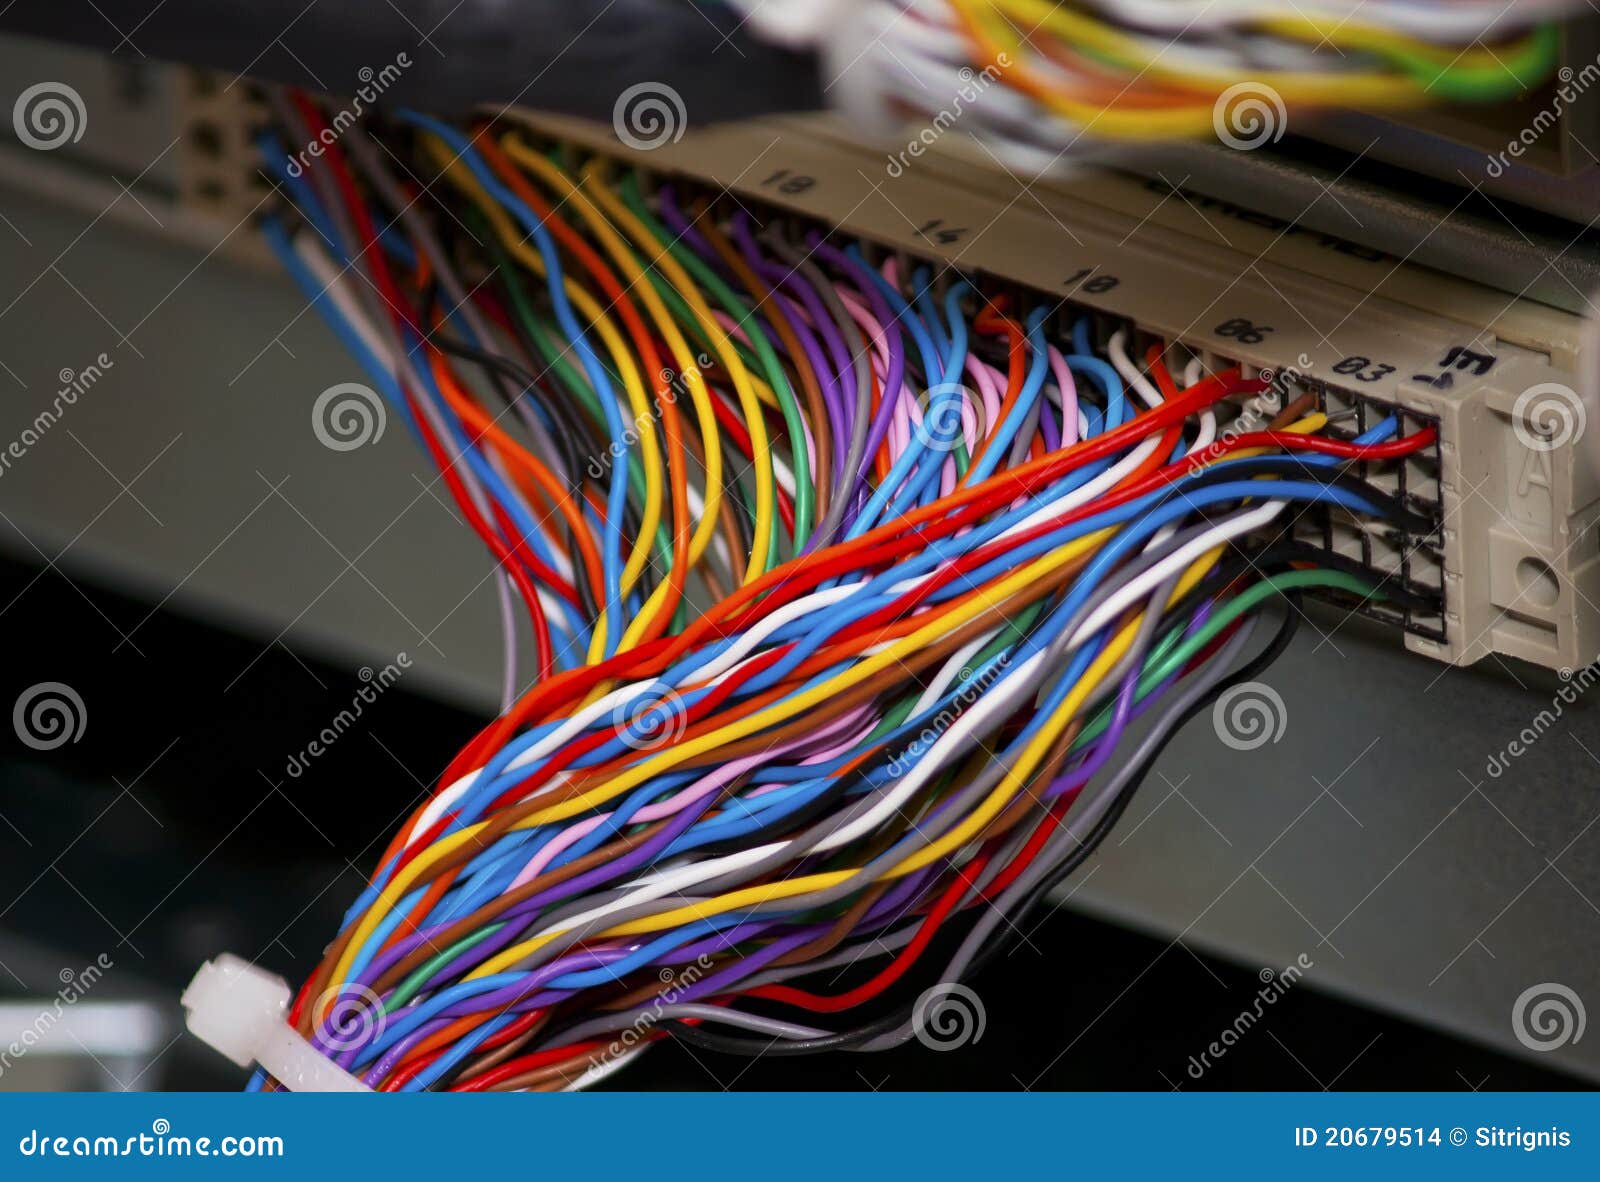 colorful dsl telephony wires